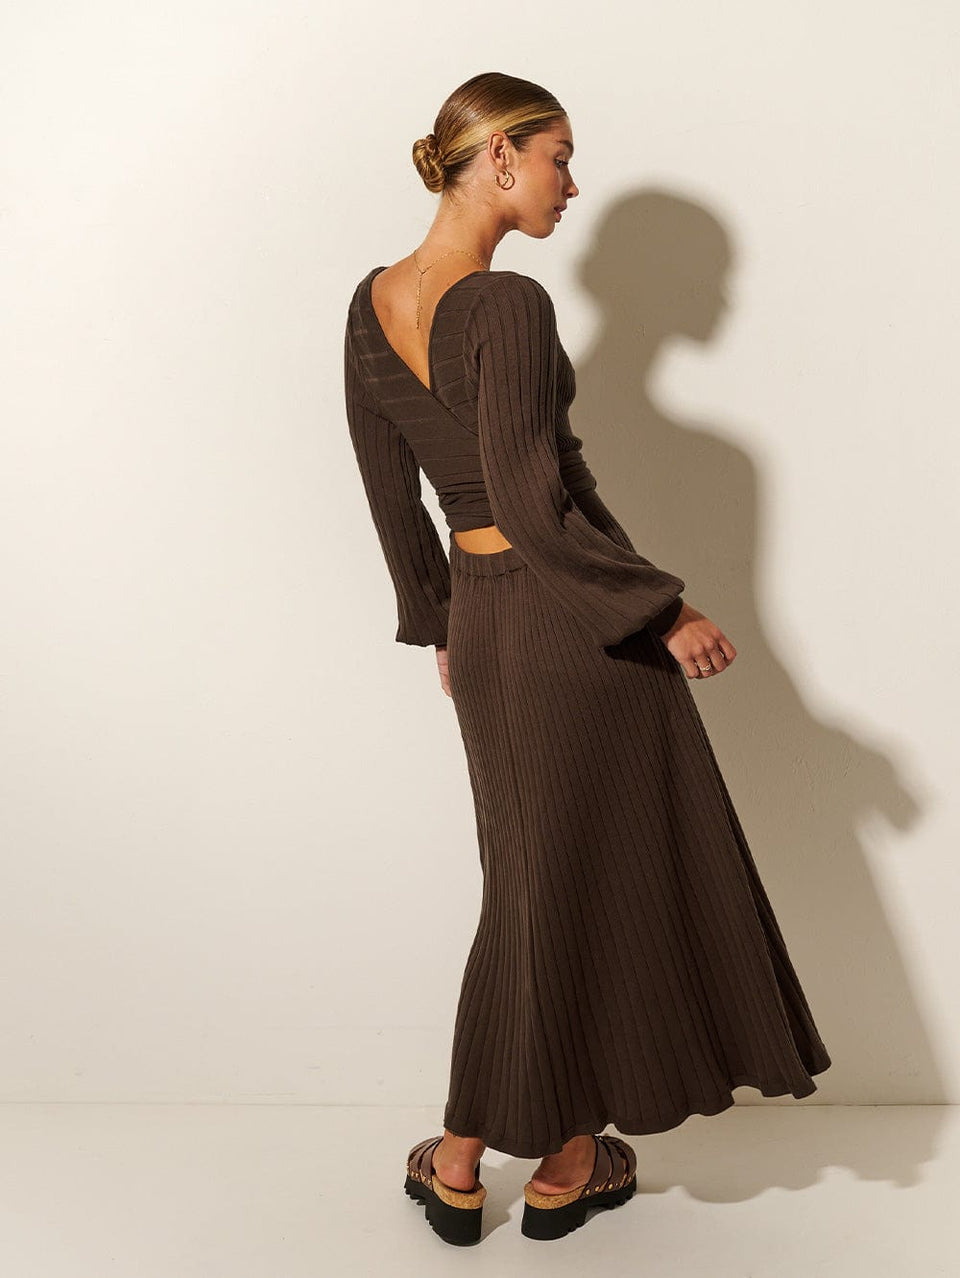 Studio model wears the KIVARI Yolanda Long Sleeve Knit Dress - Chocolate: A rich brown reversible dress made from rib knit stitching with soft underbust seams, a tie-back feature with cut-out detail, full-length blouson sleeves and an A-line skirt.